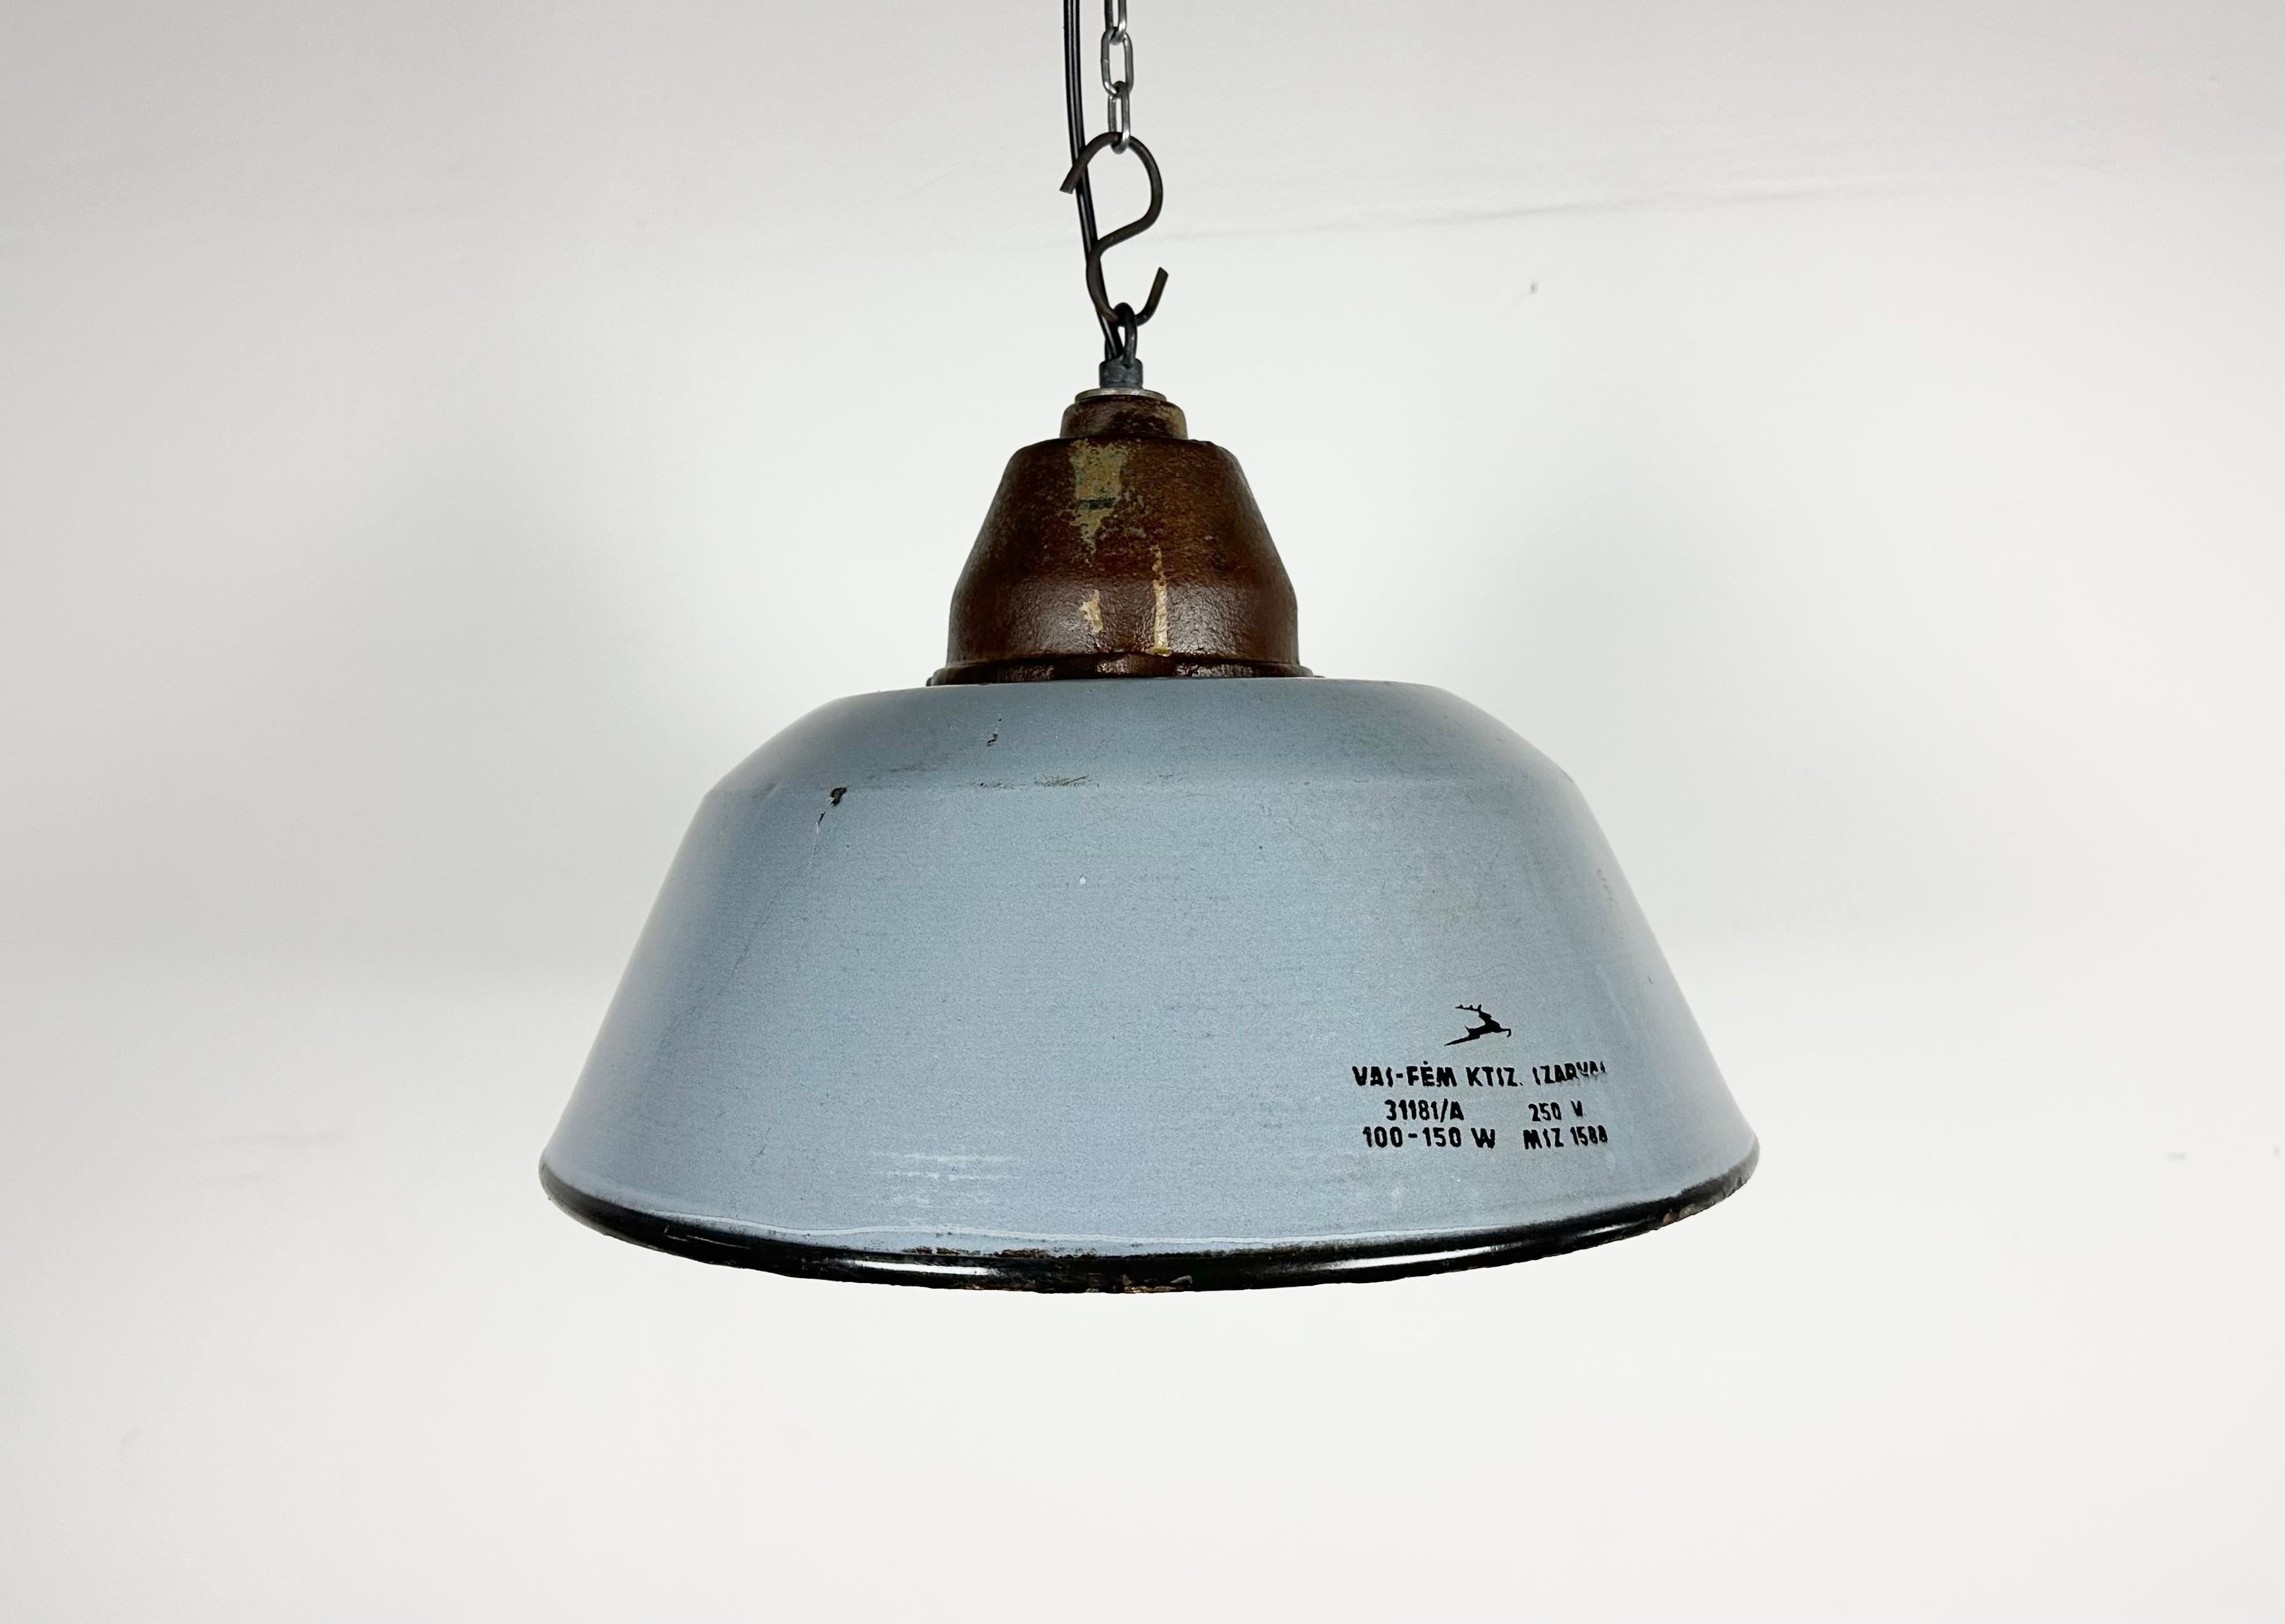 Industrial hanging lamp manufactured by Szarvasi Vas - Fém in Hungary during the 1960s. It features a grey enamel shade, white enamel interior and a cast iron top. New porcelain socket requires E 27/ E26 light bulbs. New wire. The diameter of the